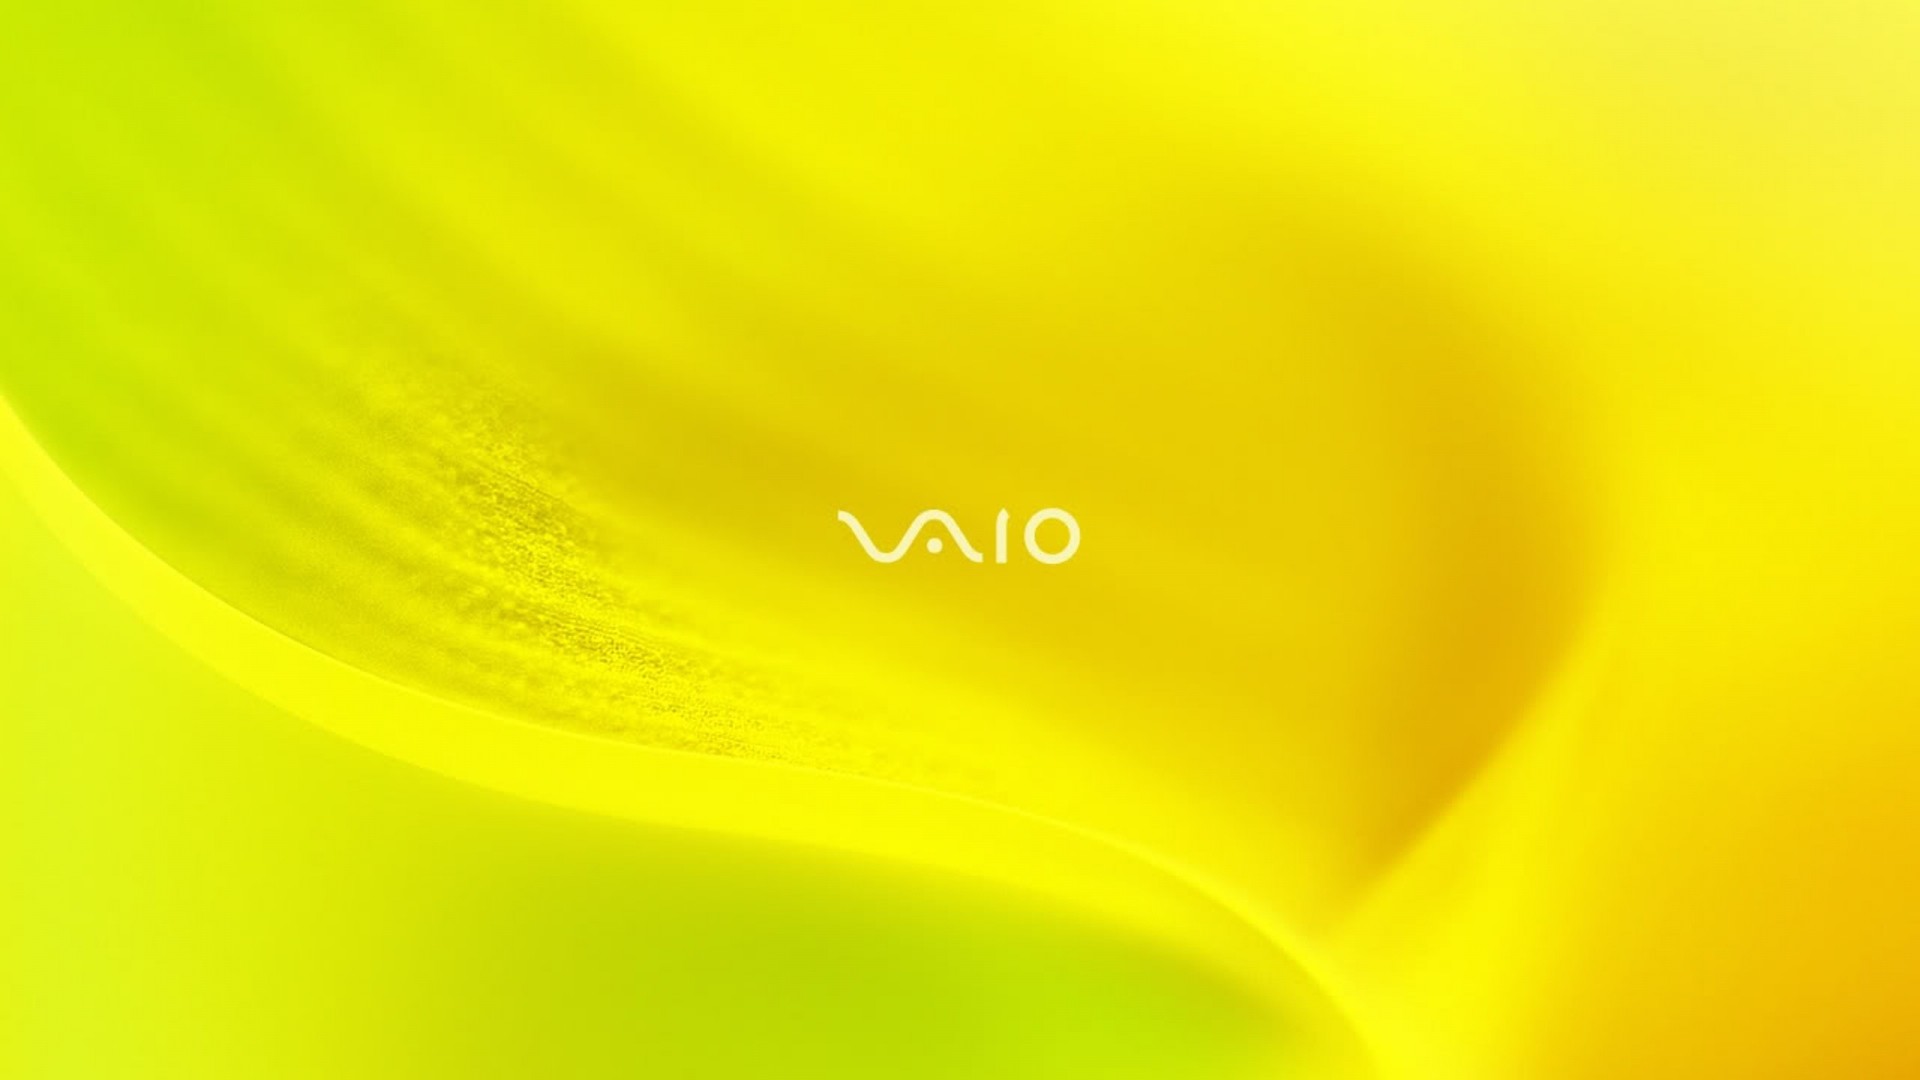 1920x1080 Get the latest sony vaio, yellow, system news, pictures and videos and  learn all about sony vaio, yellow, system from wallpapers4u.org, your  wallpaper news ...